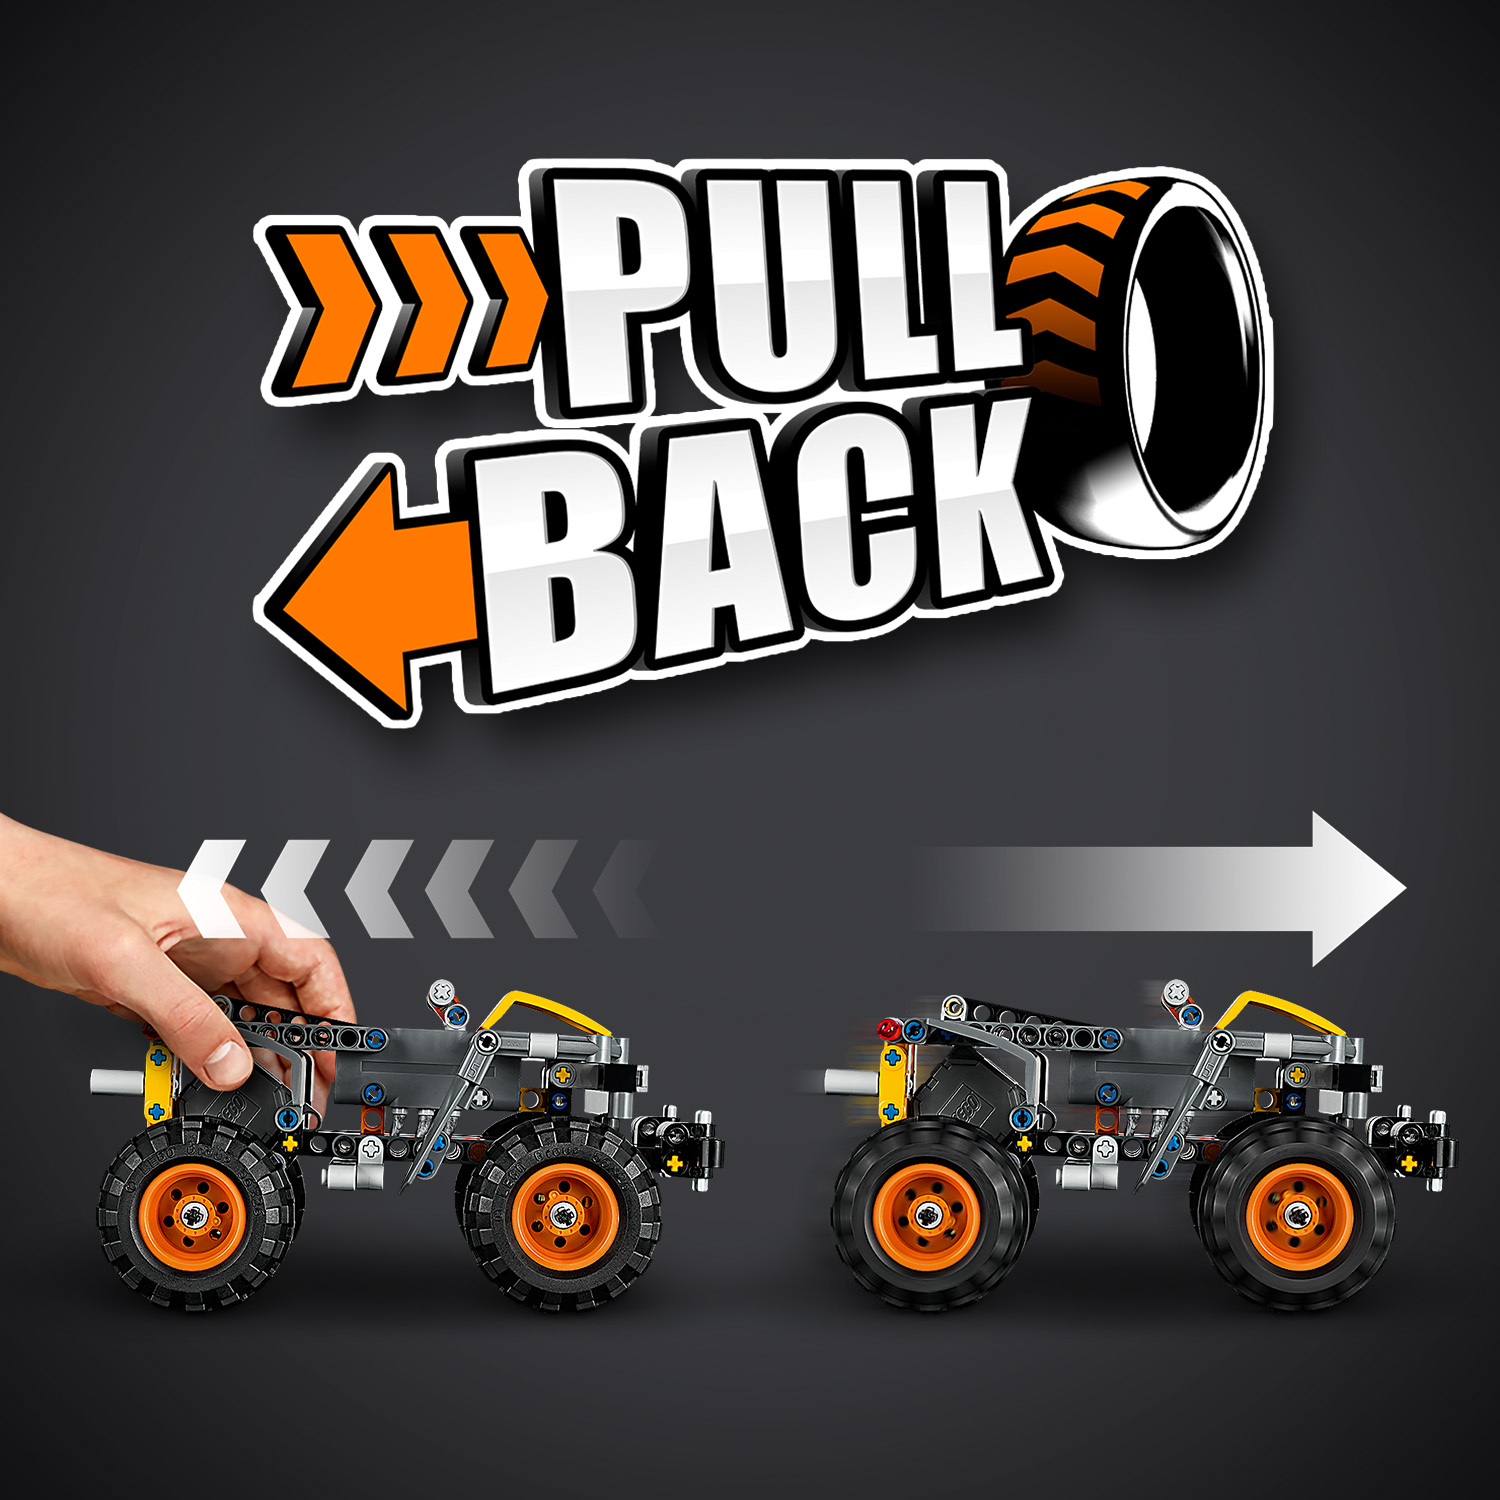 Pull-back action